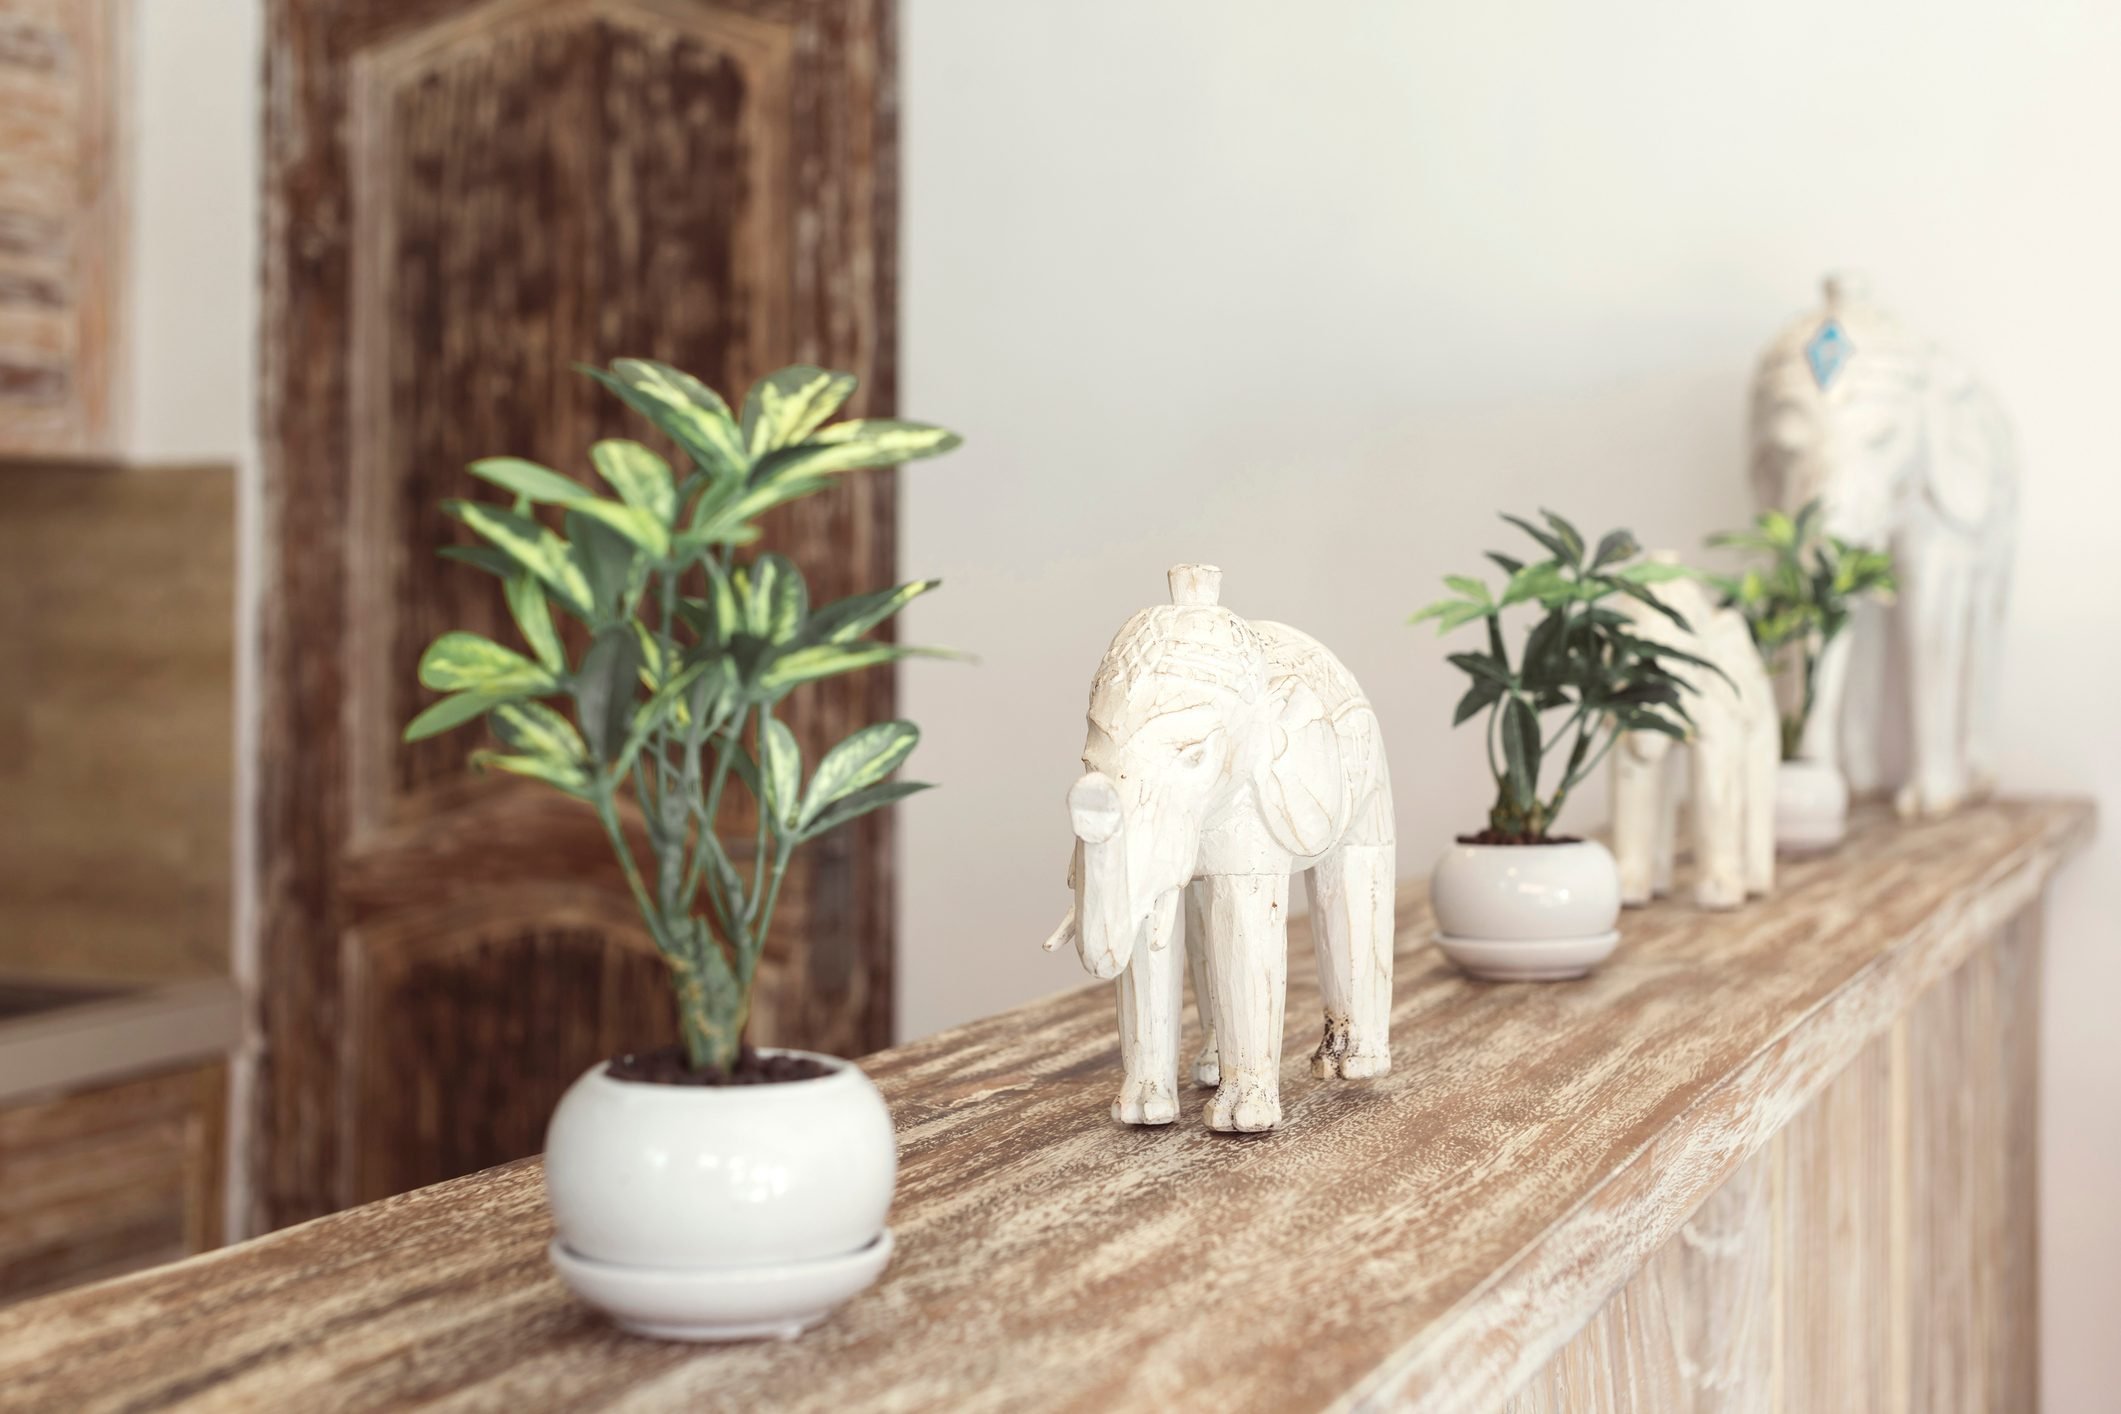 Elephant Statue Meaning in Every Room of the House | Taste of Home